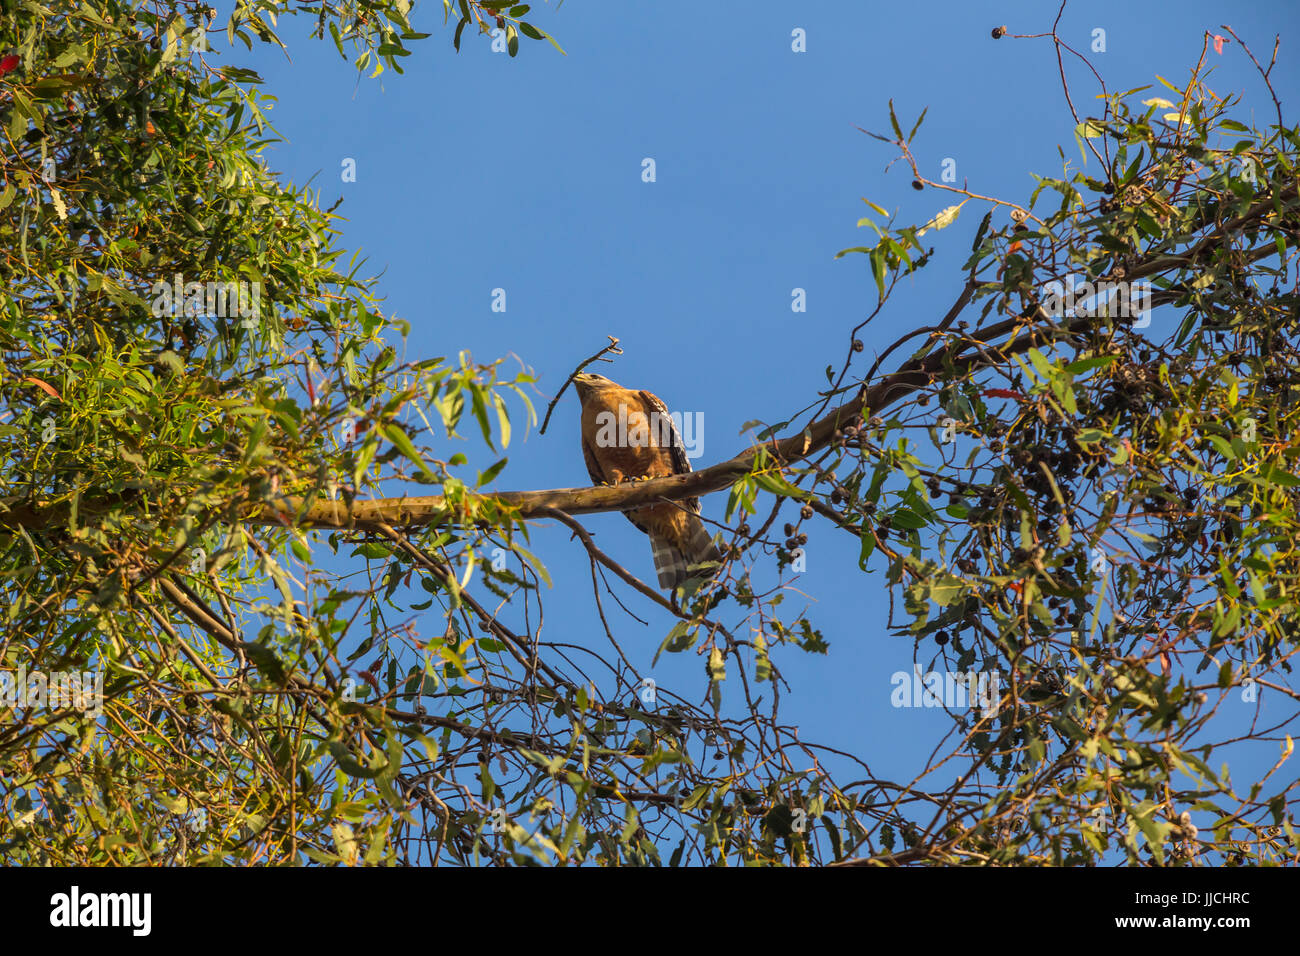 Red-shouldered hawk, Buteo lineatus, nest building, collecting nesting material, perched on Blue-gum eucalyptus tree, Novato, Marin County, California Stock Photo